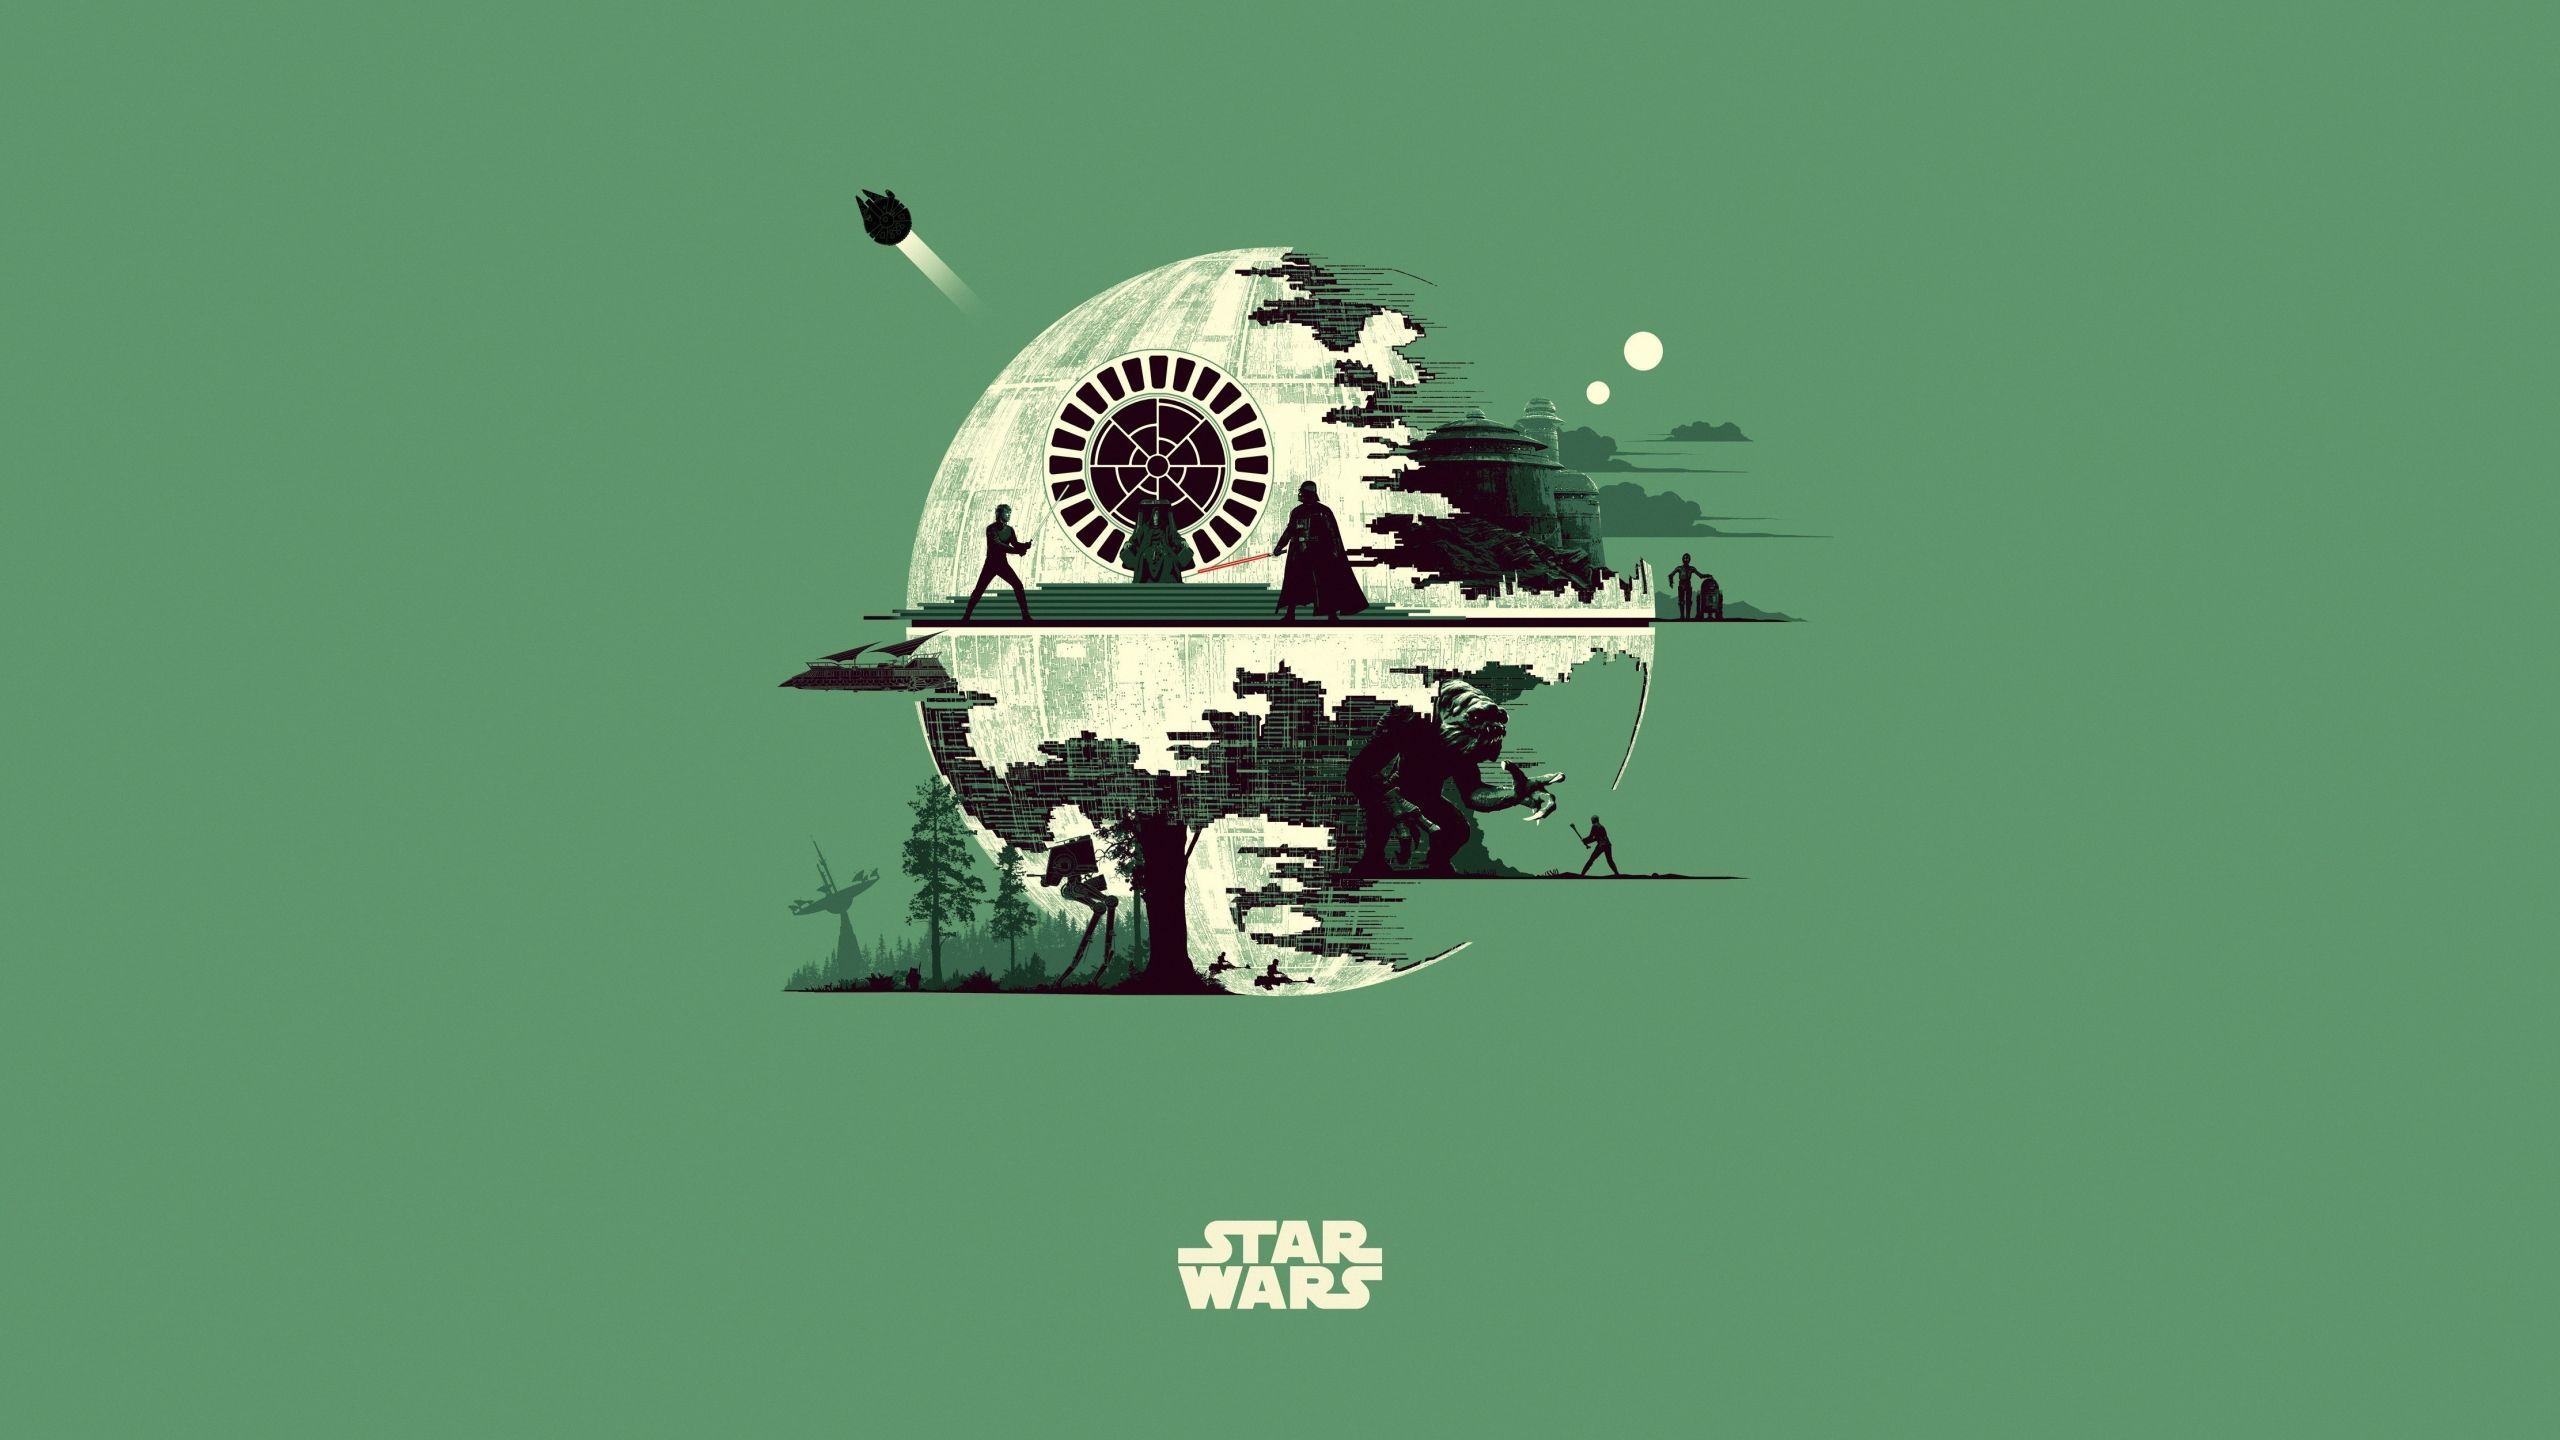 The death star from star wars with a green background - Star Wars